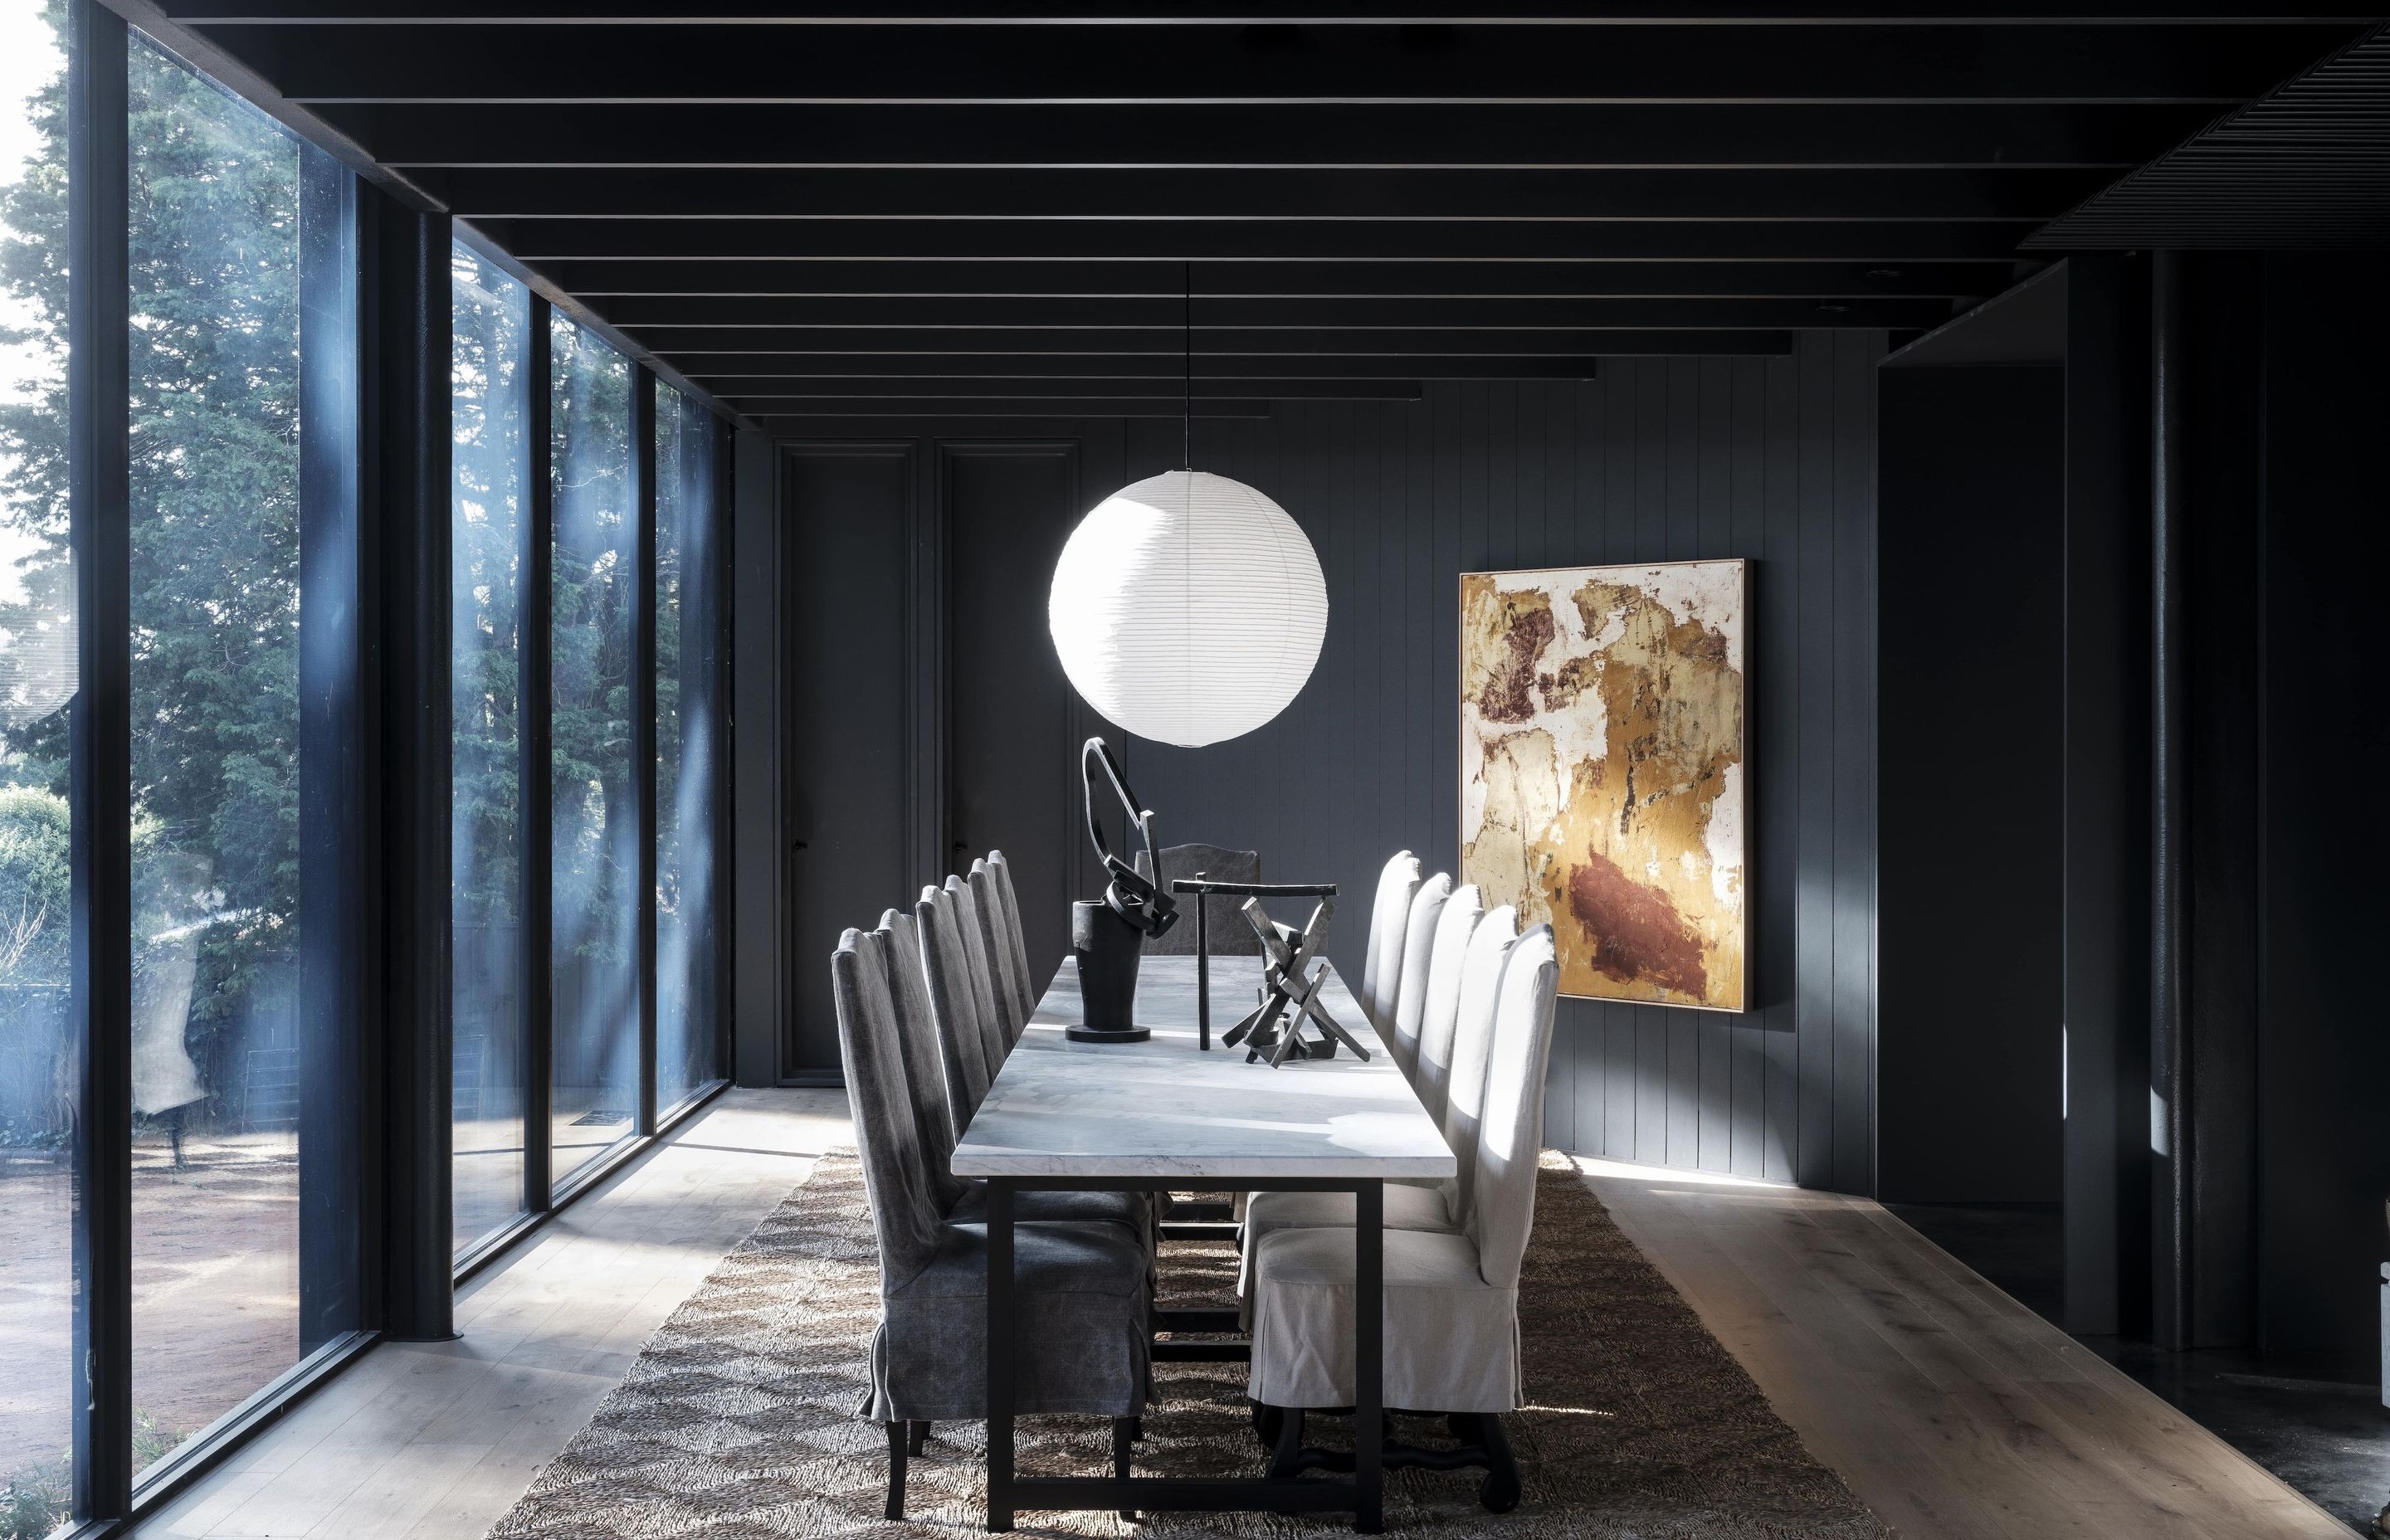 The dining room's restrained palette allows the artwork to do the talking.